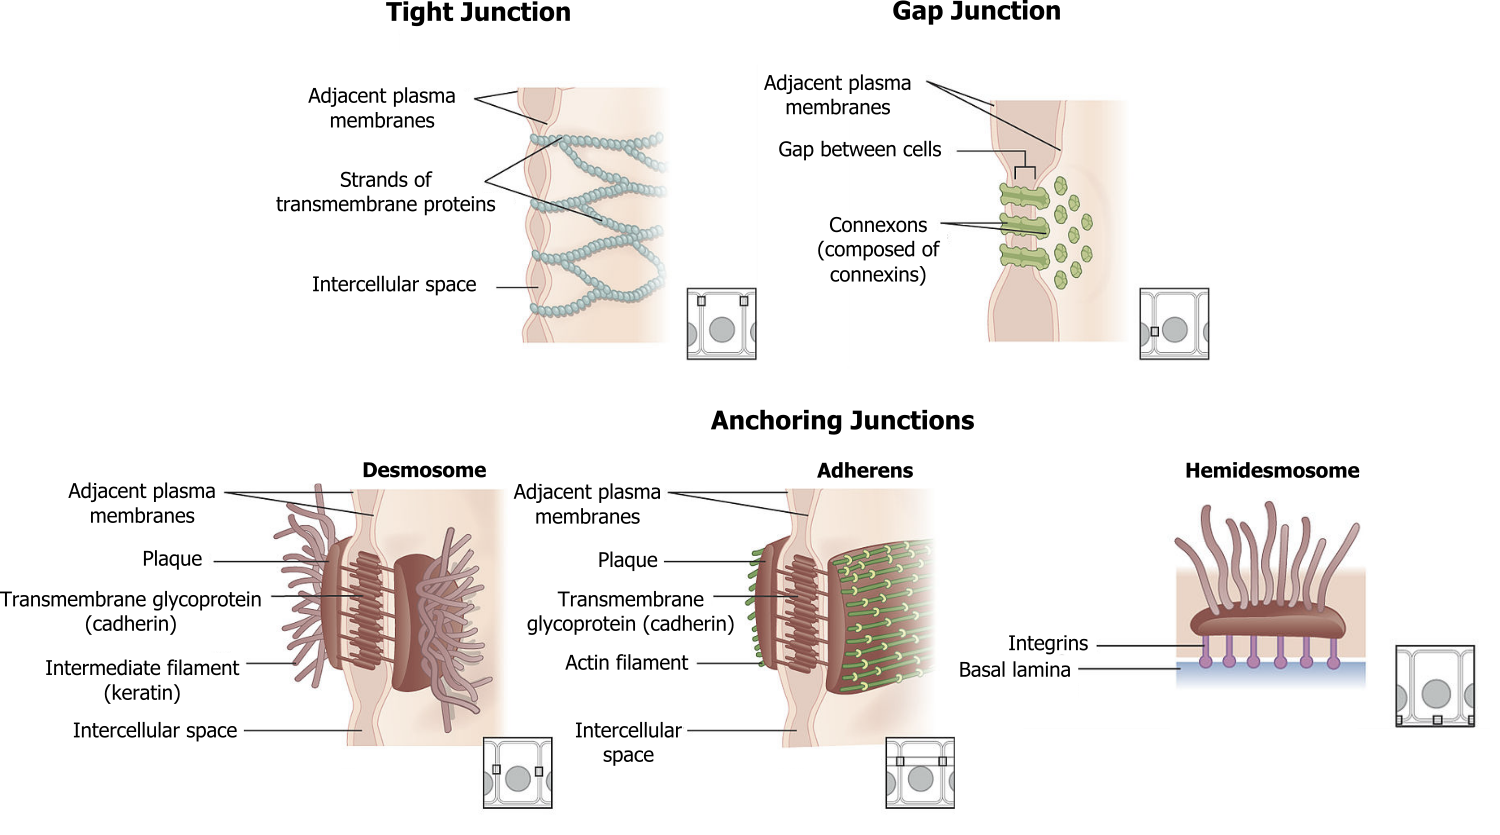 Tight junction: Adjacent plasma membranes, strands of transmembrane proteins, intracellular space. Gap junction: Adjacent plasma membranes, gap between cells, connexons (composed of connexins). Anchoring junctions; Desmosome: Adjacent plasma membranes, plaque, transmembrane glycoprotein (cadherin), intermediate filament (keratin), intercellular space. Adherens: Adjacent plasma membranes, plaque, transmembrane glycoprotein (cadherin), actin filament, intracellular space. Hemidesmosome: integrins, basal lamina.